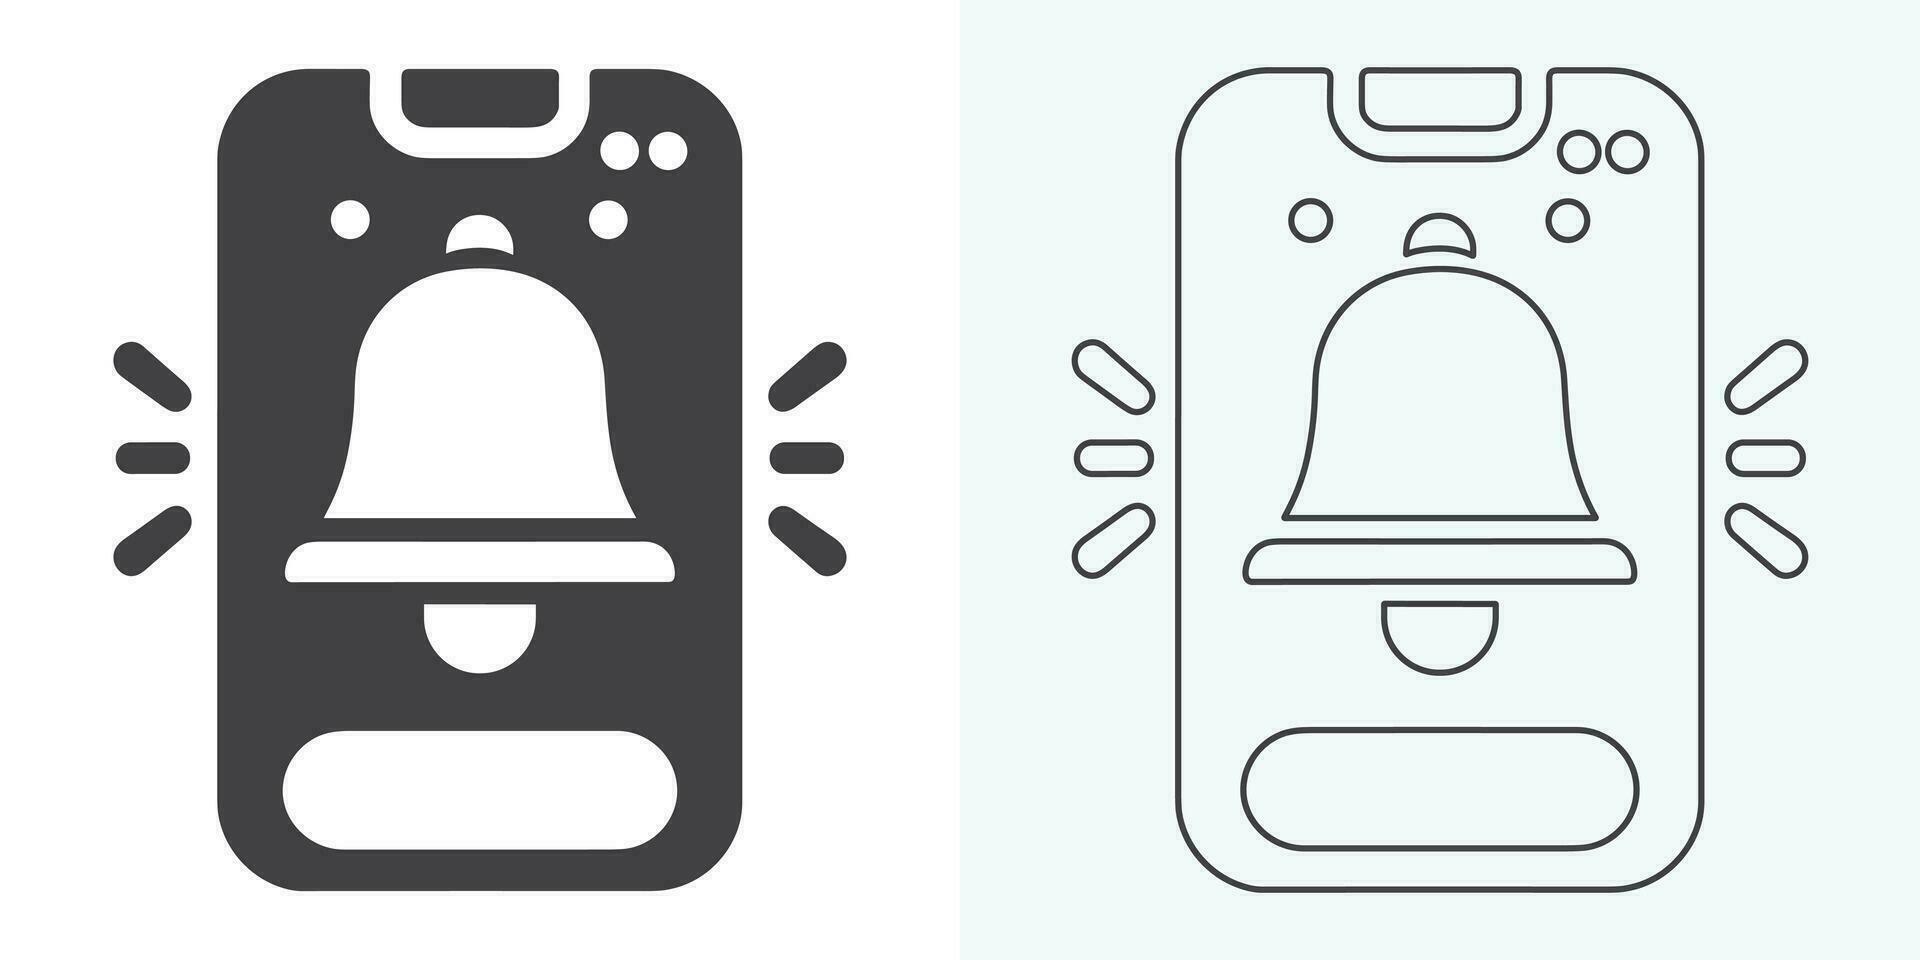 Christmas Bell Icon . Christmas Bell Icon. Notification bell icon for incoming inbox message. Vector ringing bell and notification number sign for alarm clock and smartphone application alert